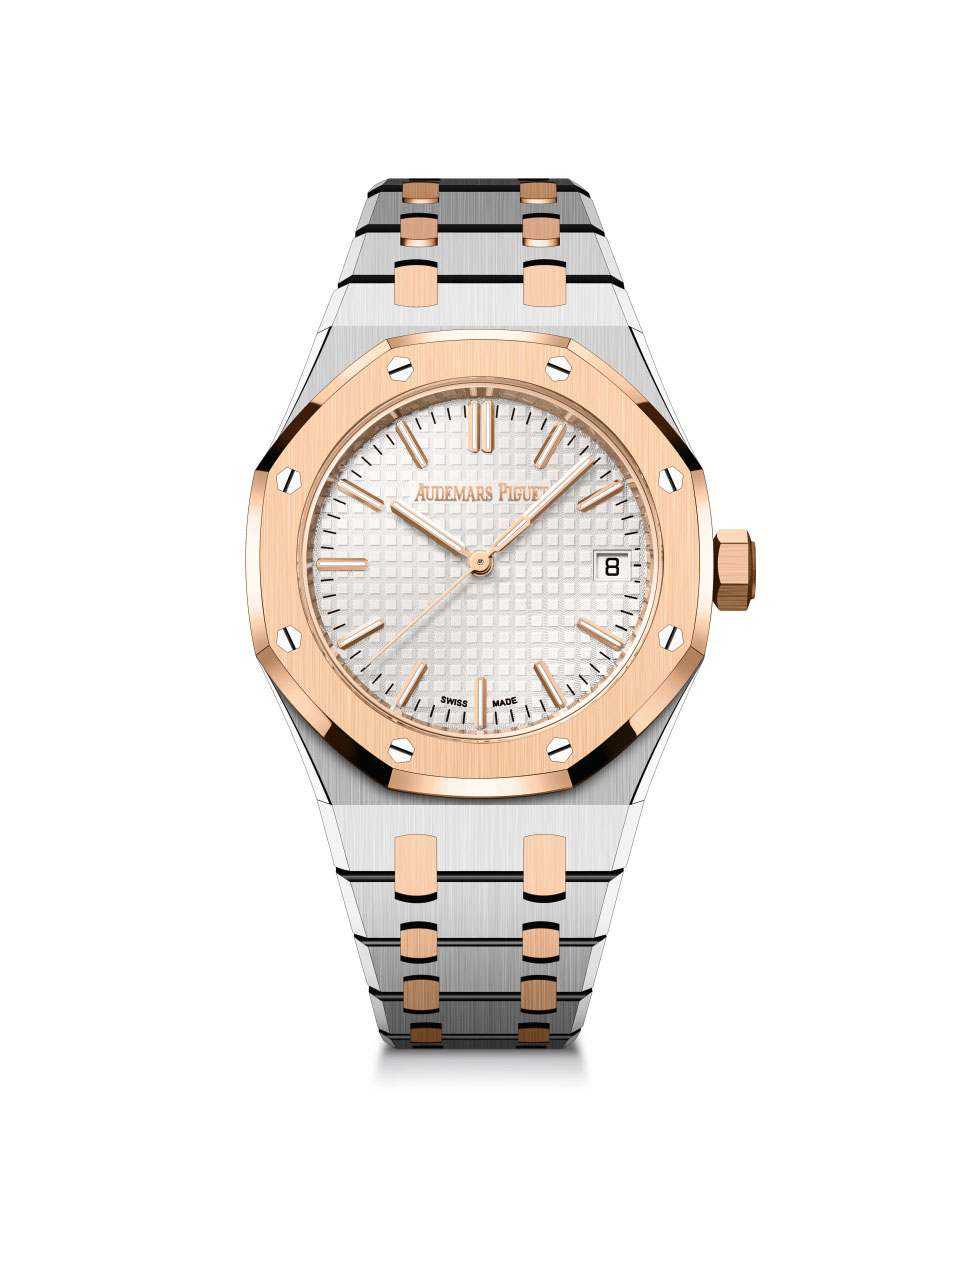 Royal Oak Selfwinding / 37mm; stainless steel case and 18-carat pink gold bezel with silver-toned dial (15550SR.OO.1356SR.01)